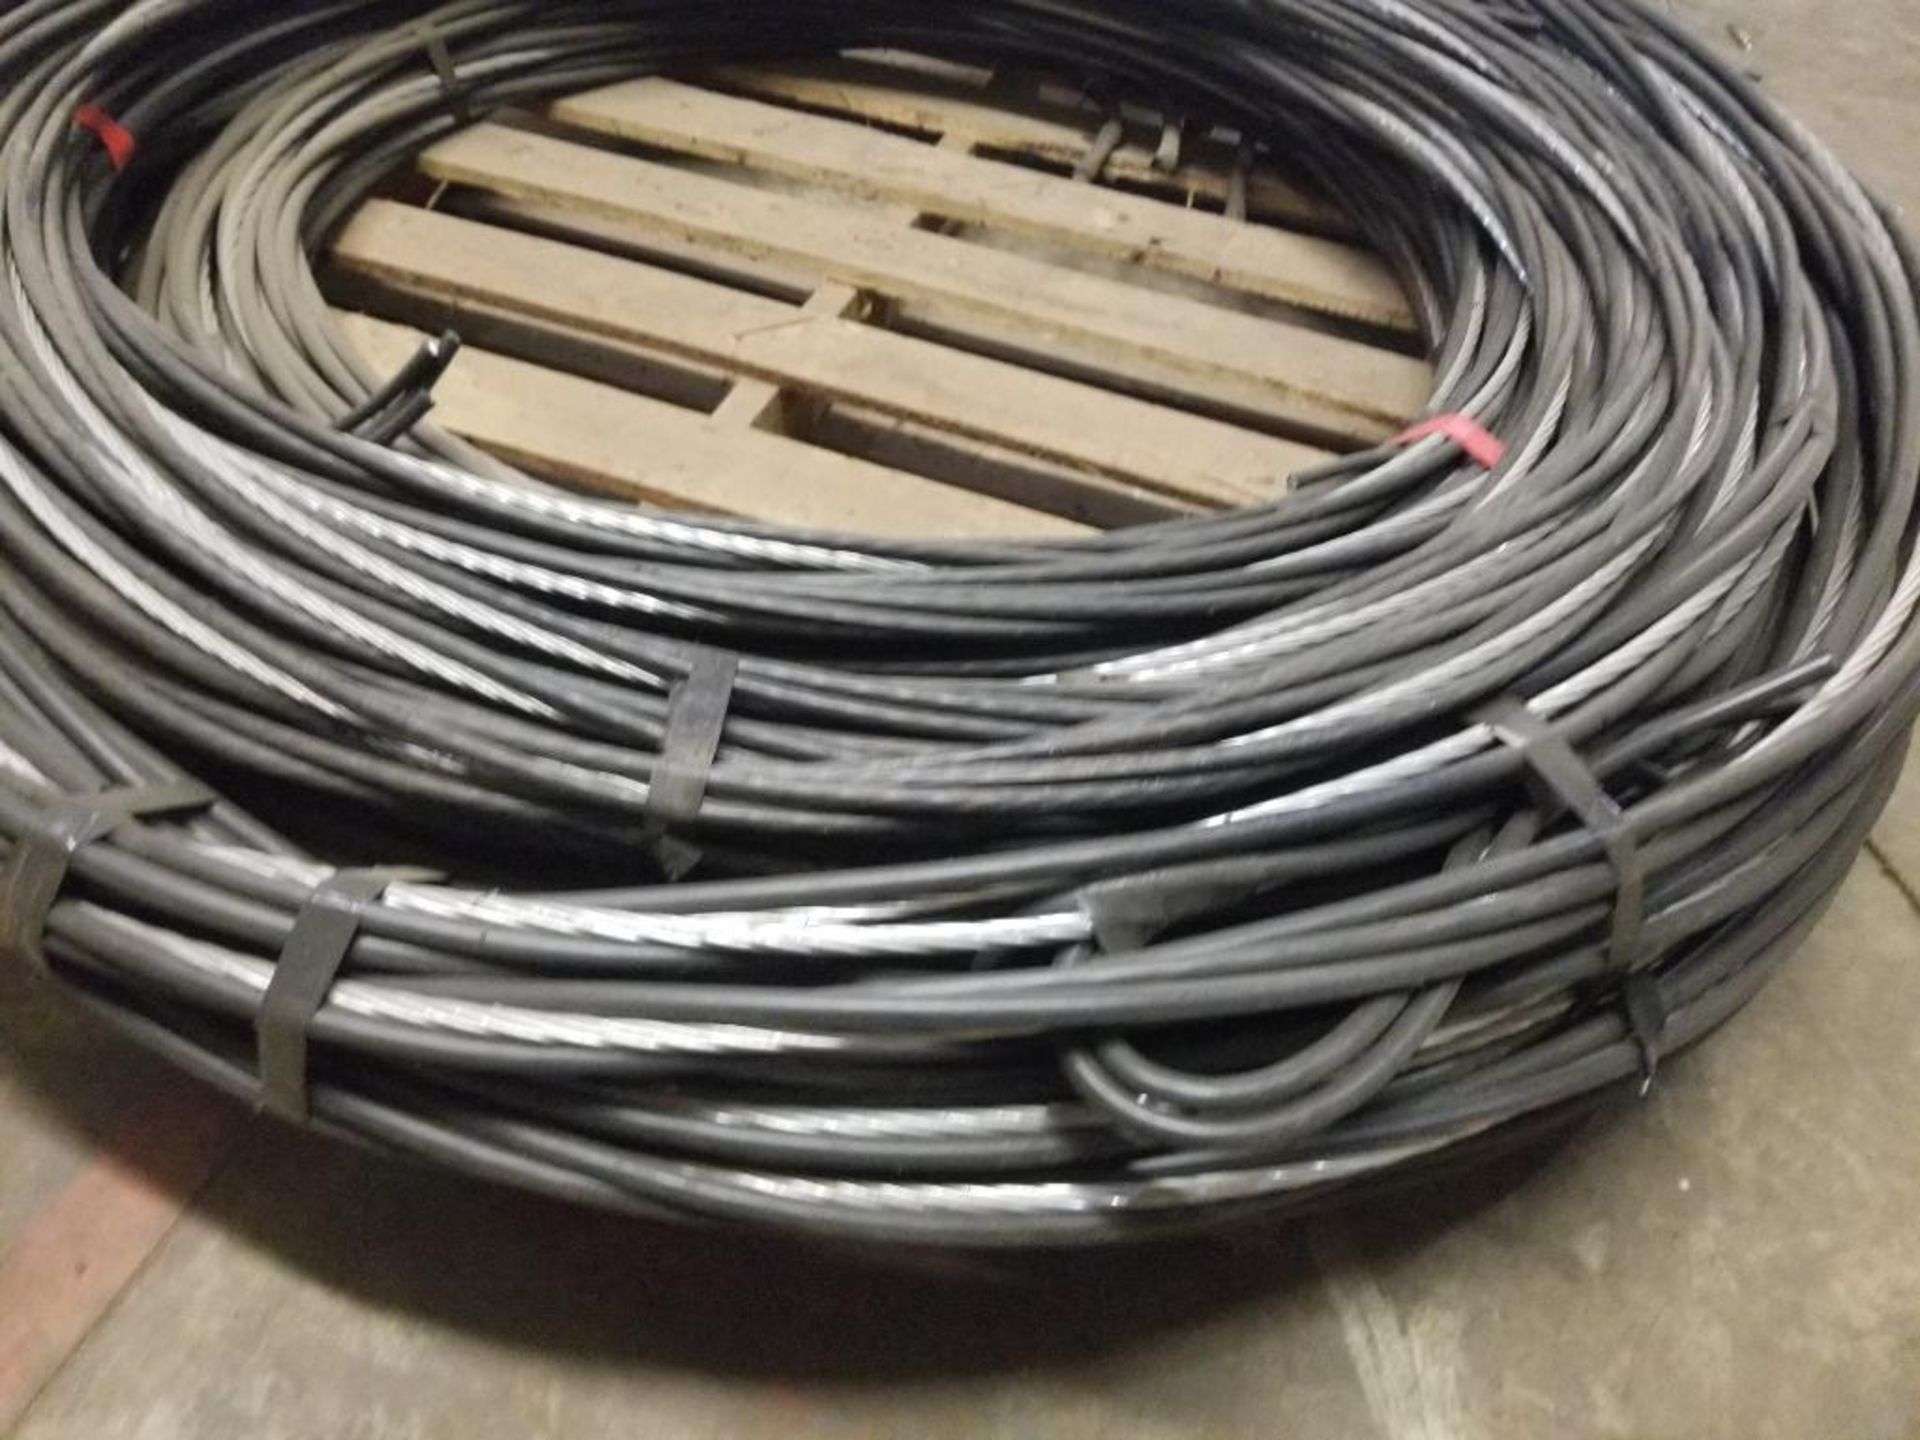 Pallet of wire. - Image 7 of 7